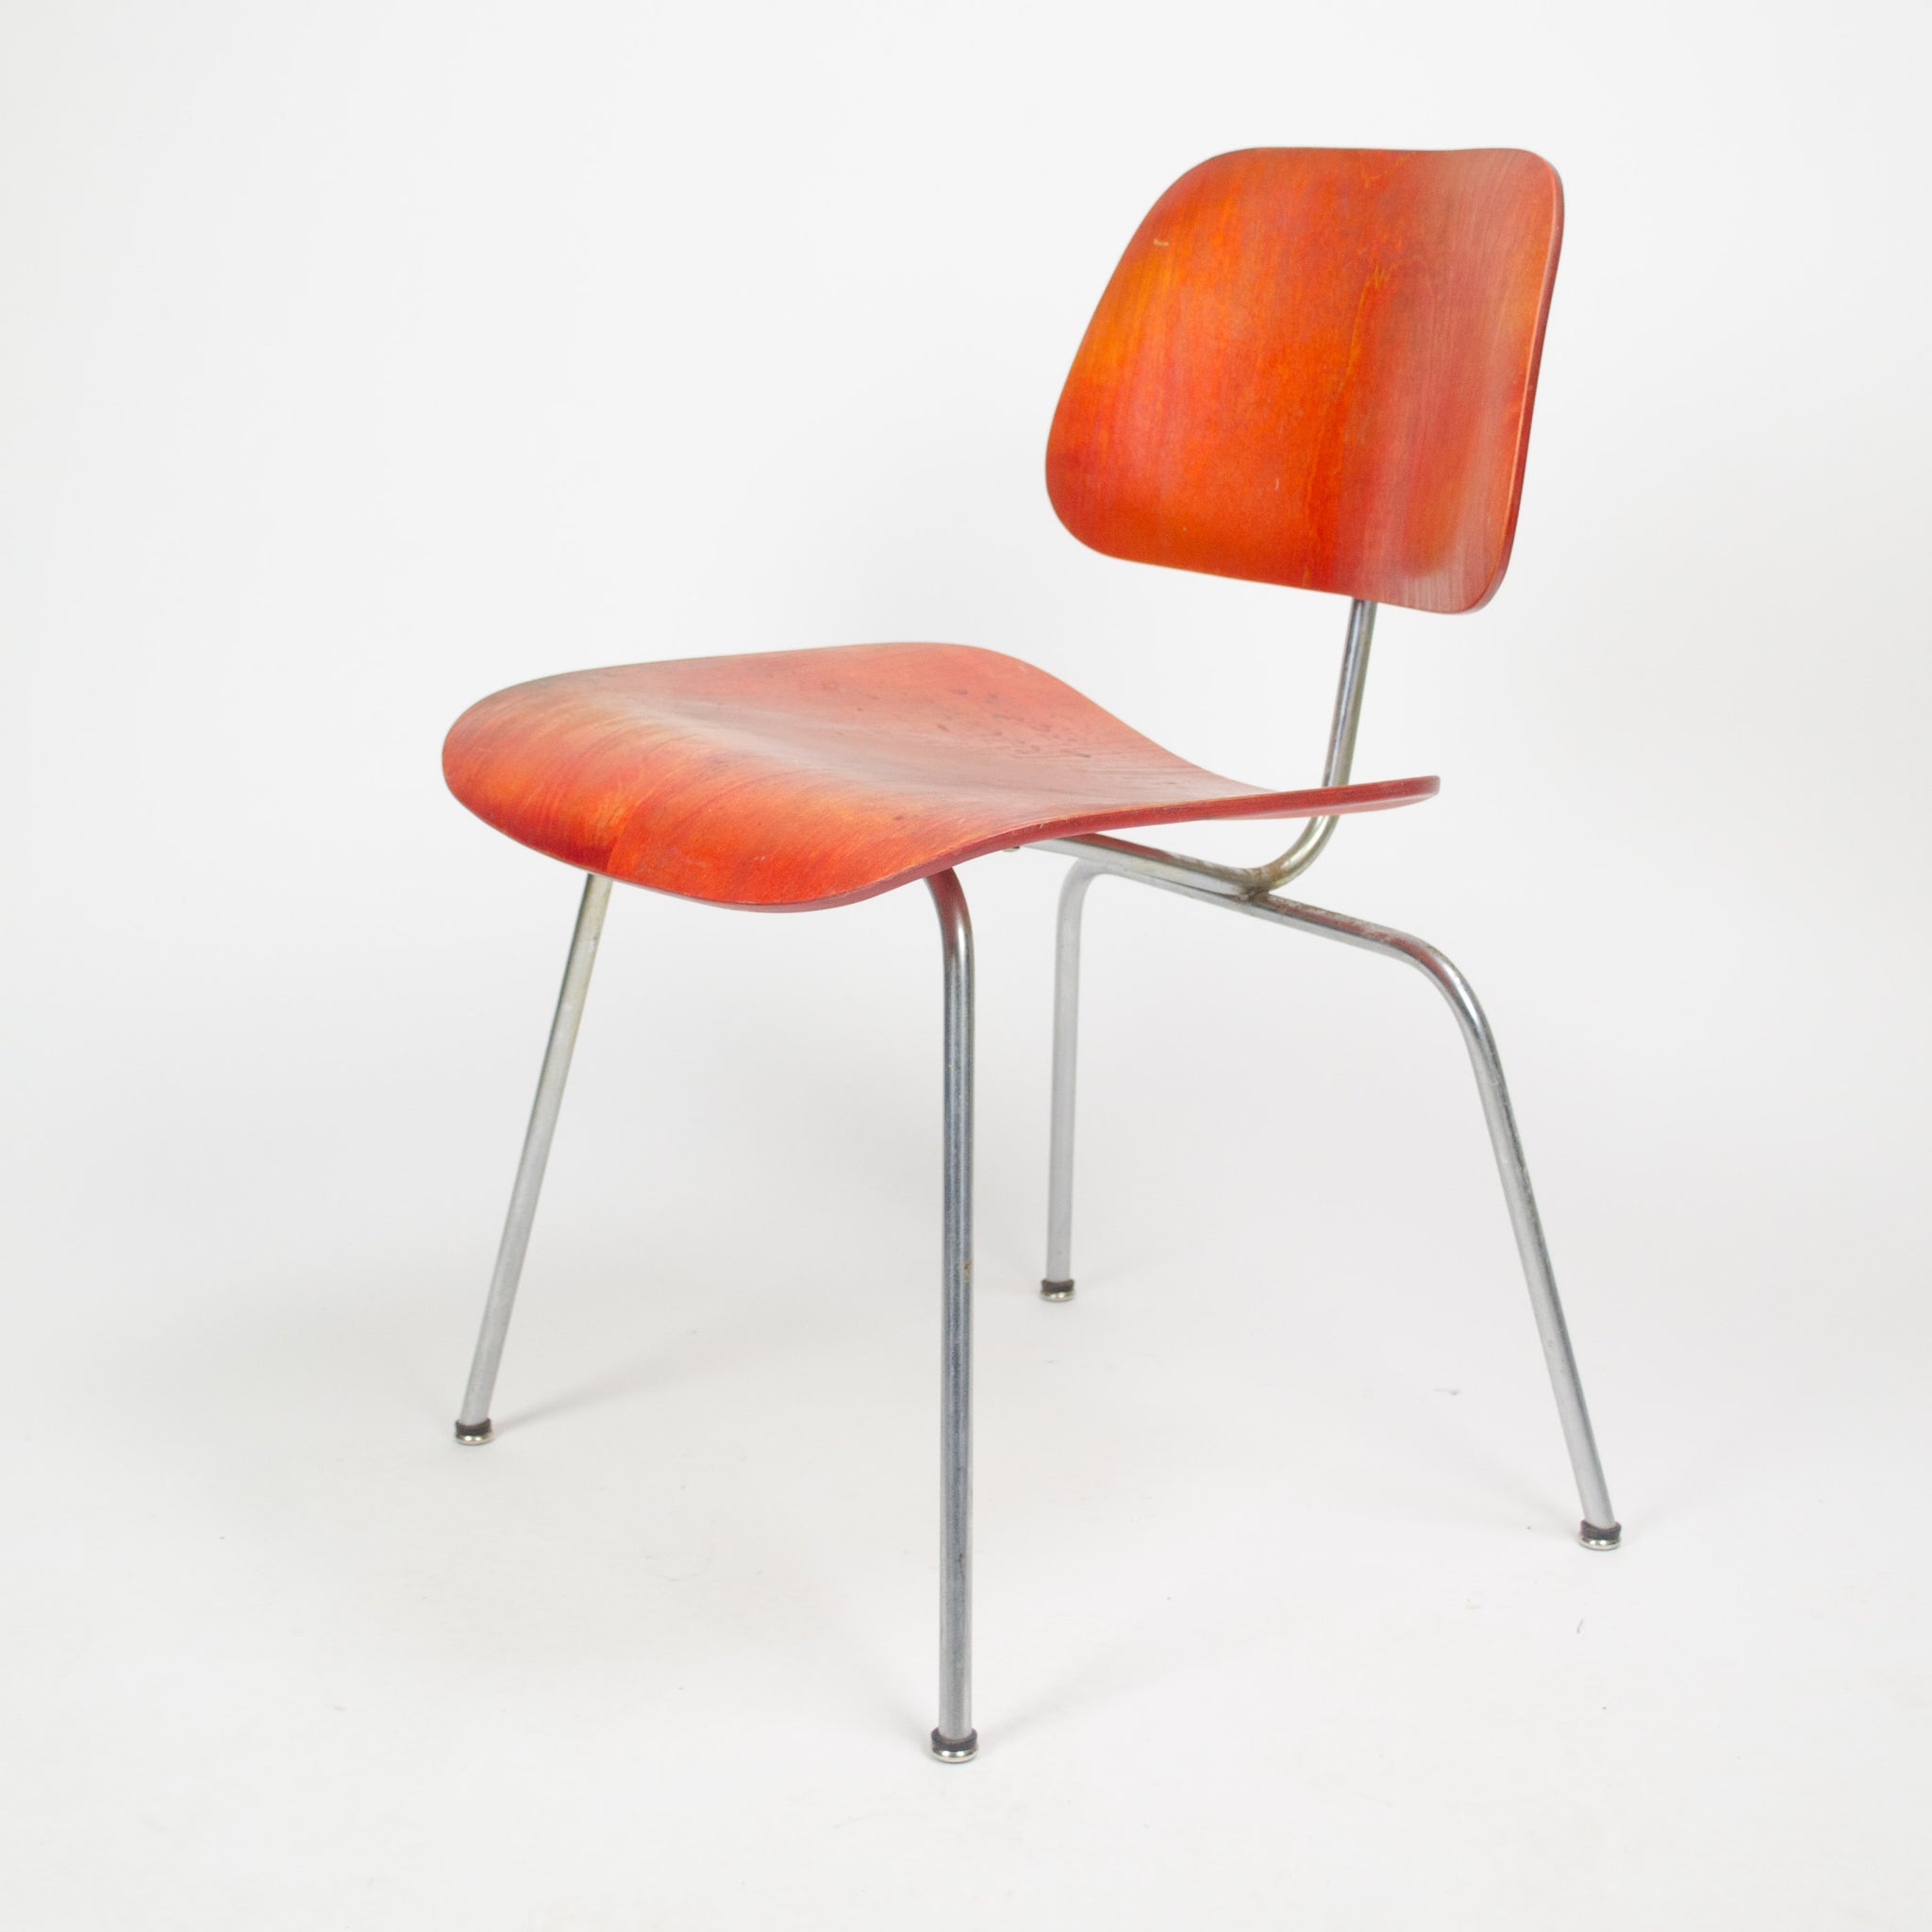 SOLD Eames Herman Miller 1951 DCM Dining Chairs Red Aniline Dye 2x Available